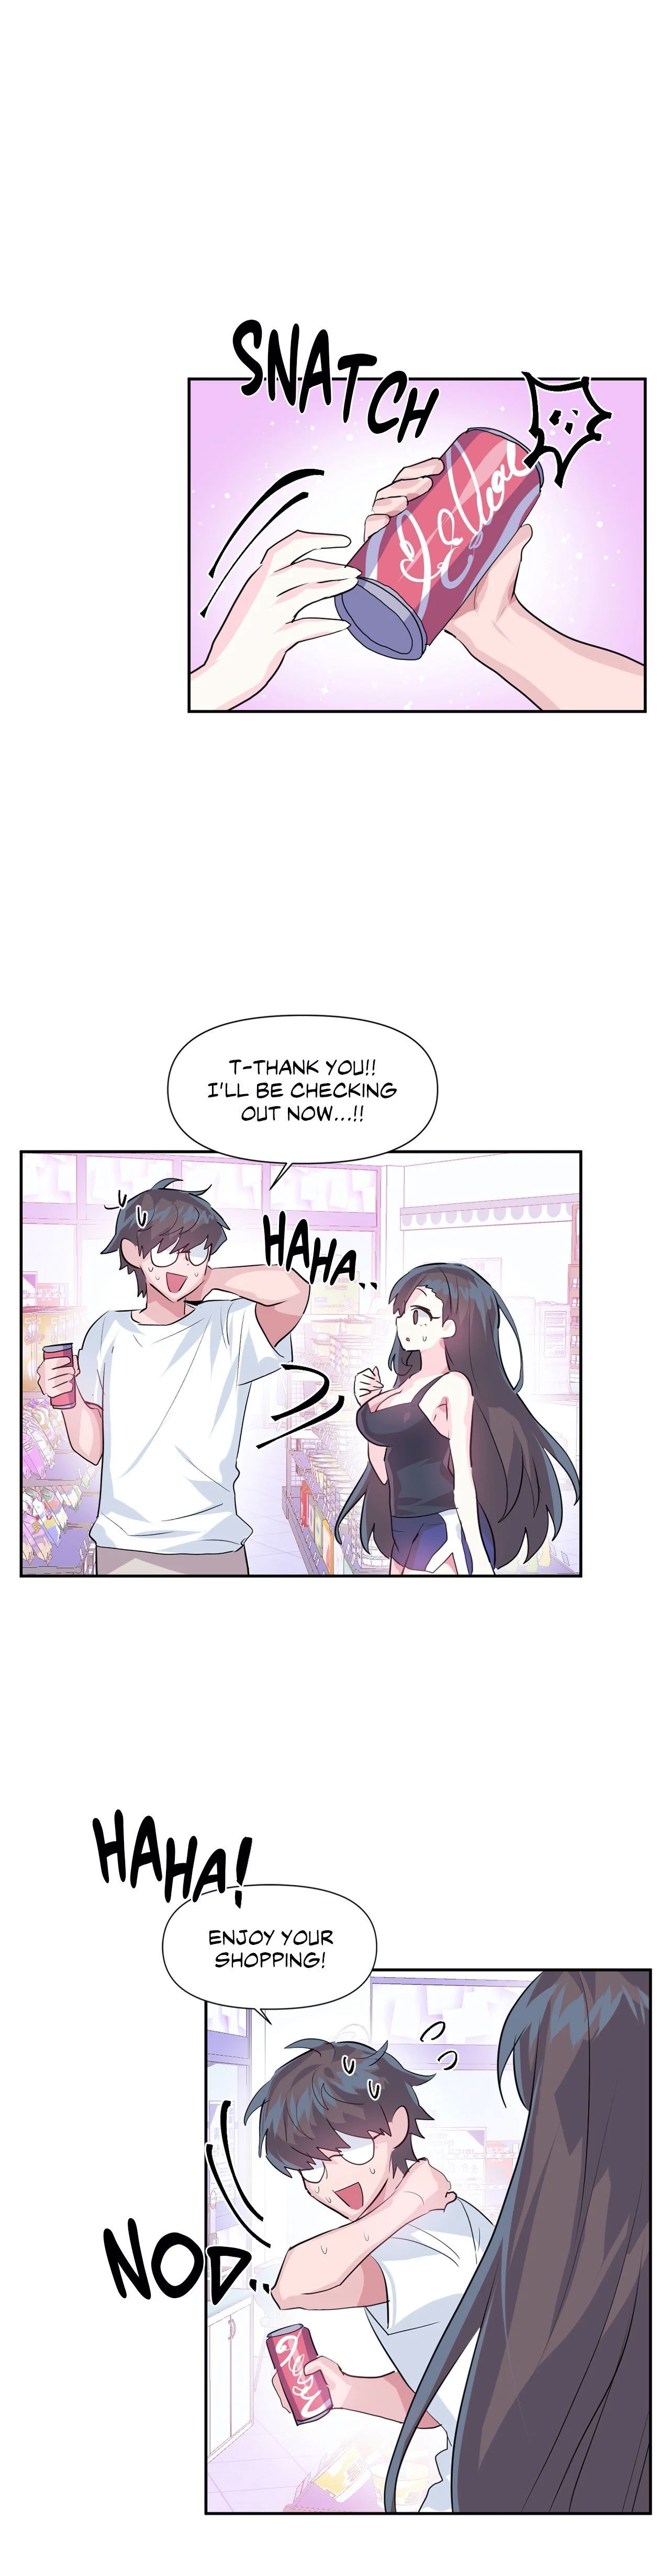 log-in-to-lust-a-land-chap-33-12